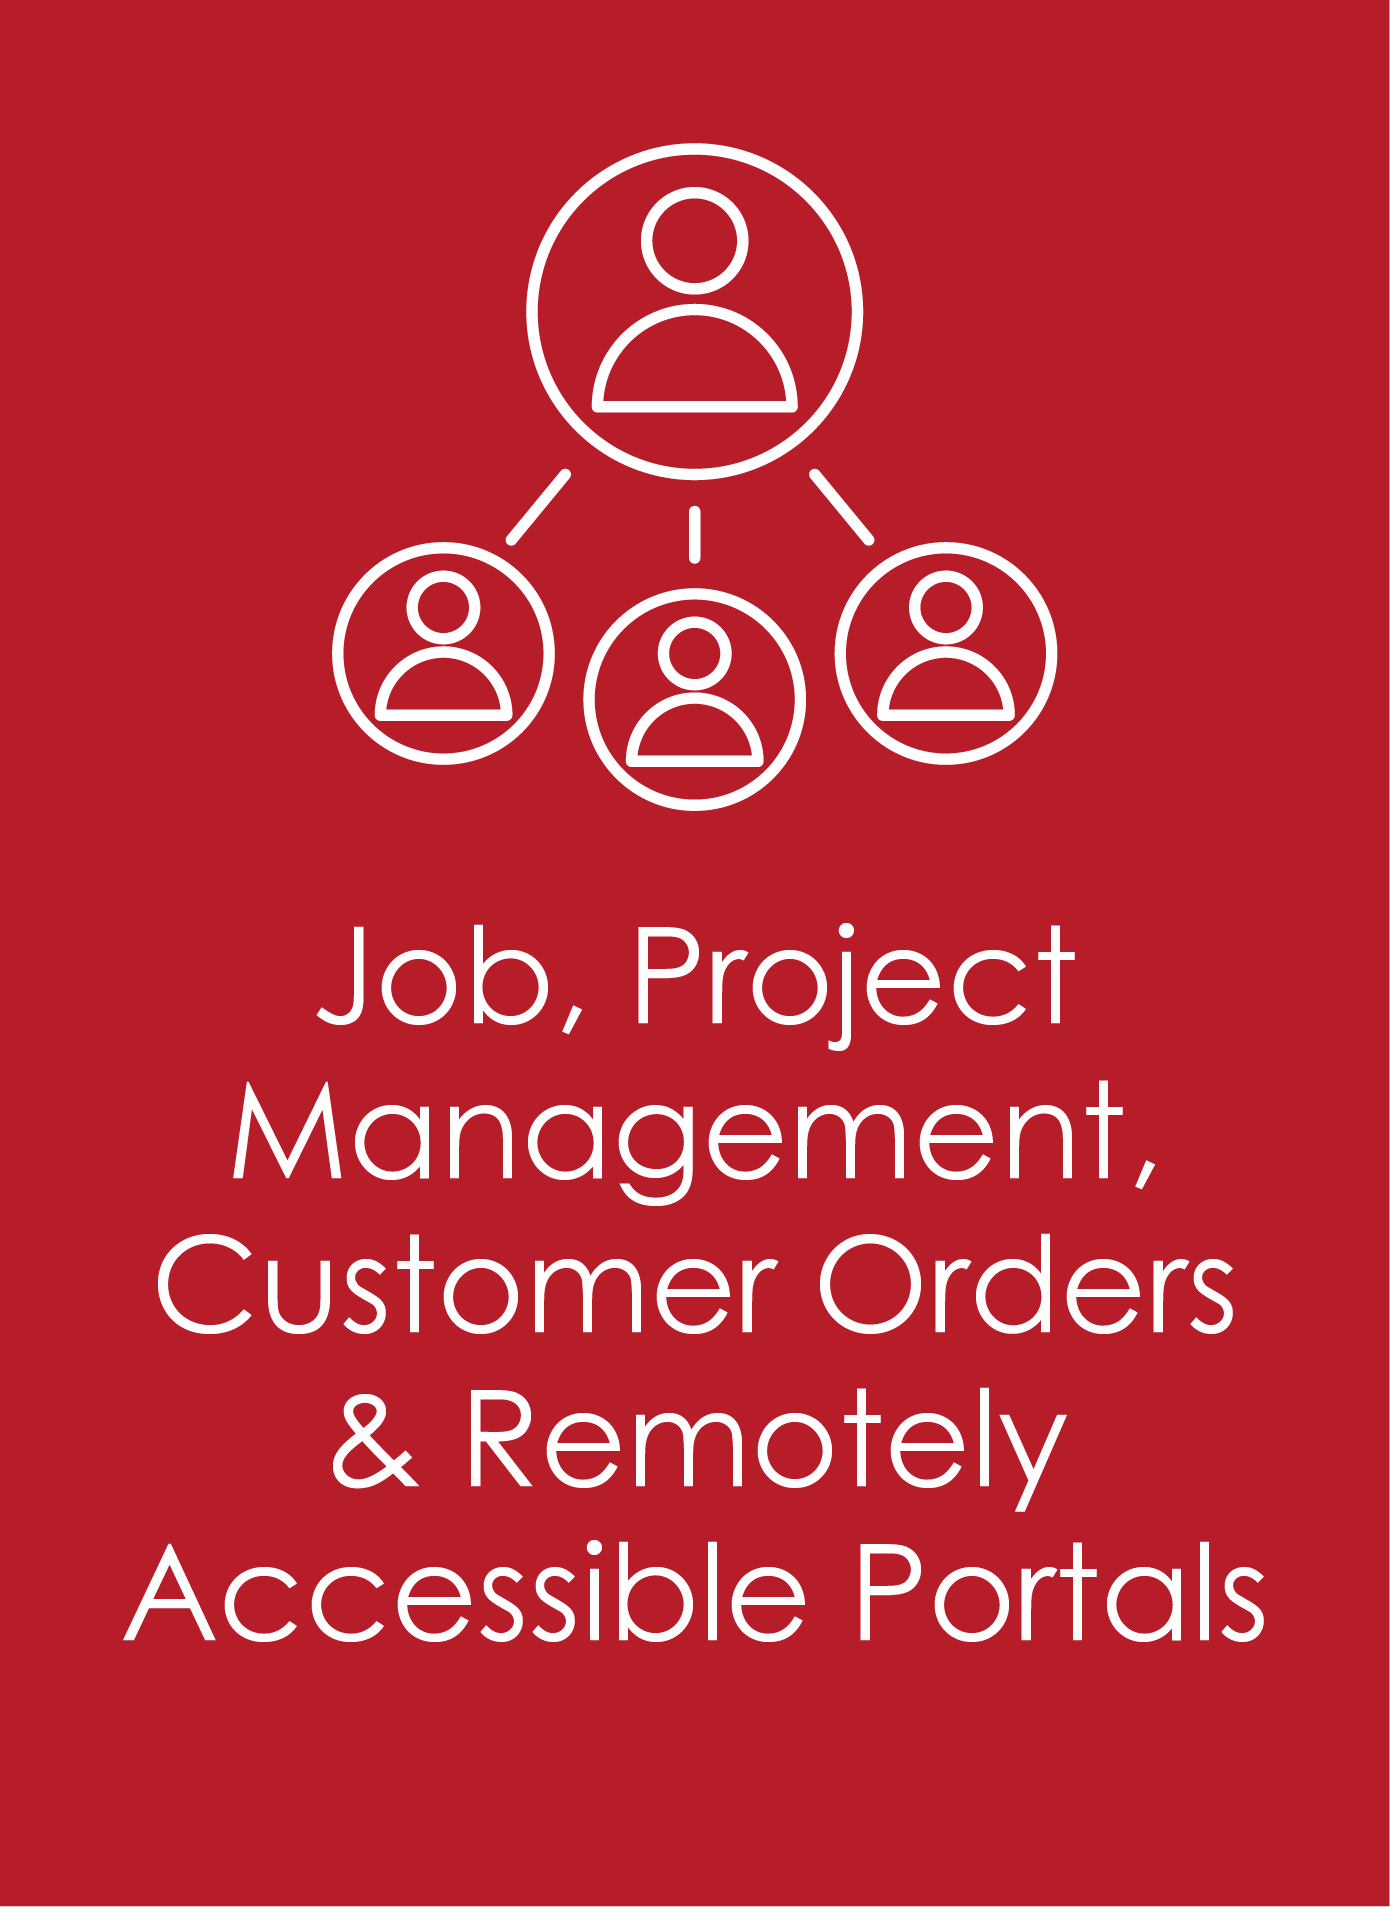 Job, Project Management, Customer orders & Remotely Accessible Portals